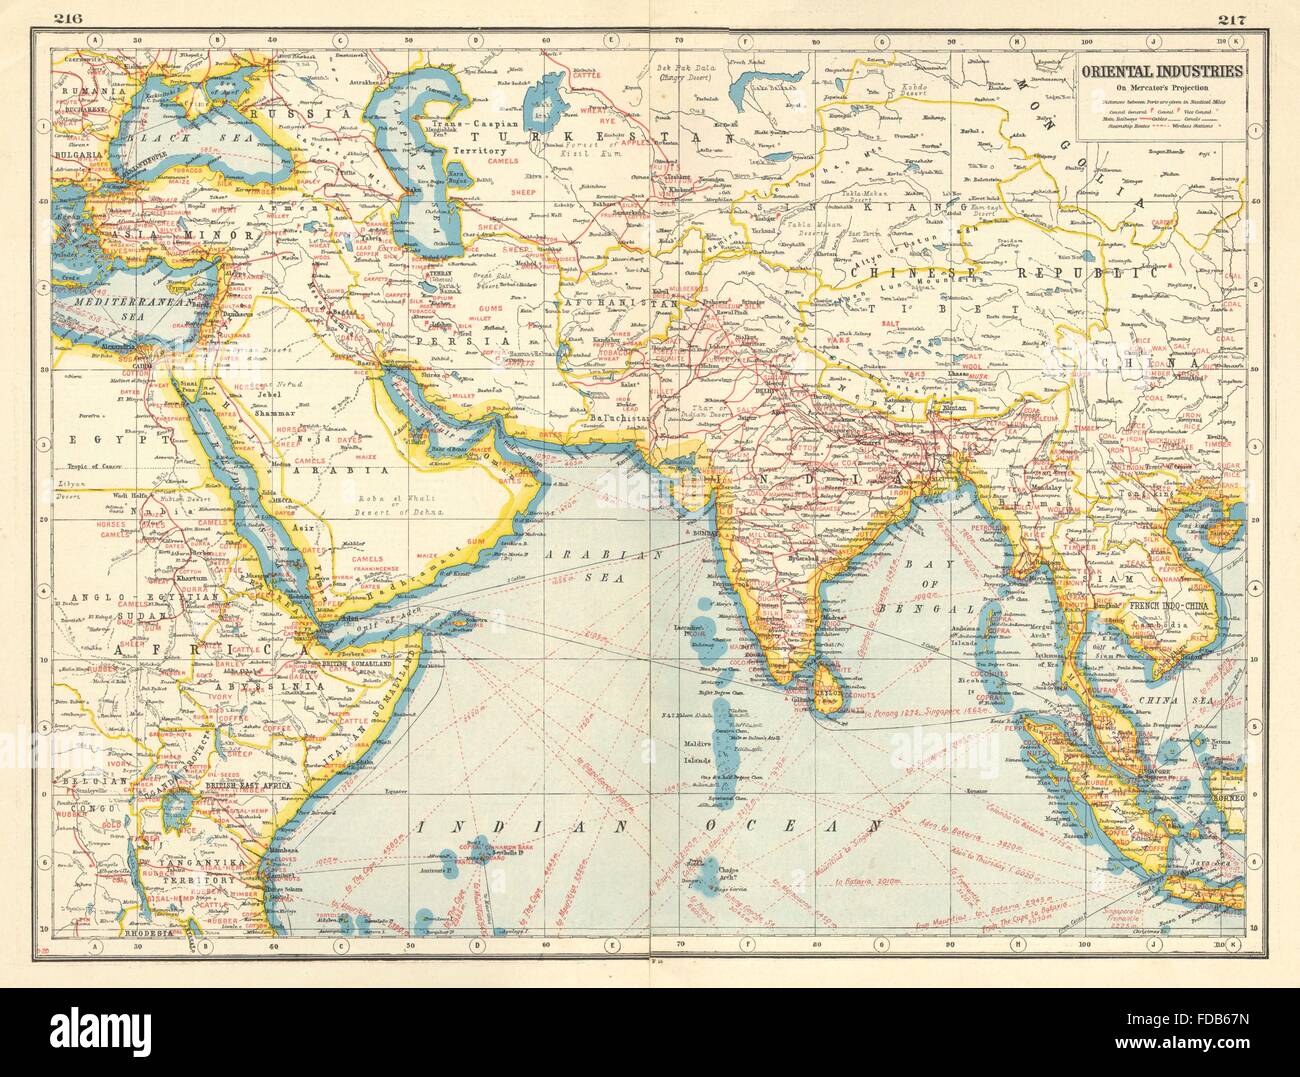 ASIA MIDDLE EAST AFRICA COMMERCIAL:Shows agricultural/mineral products, 1920 map Stock Photo